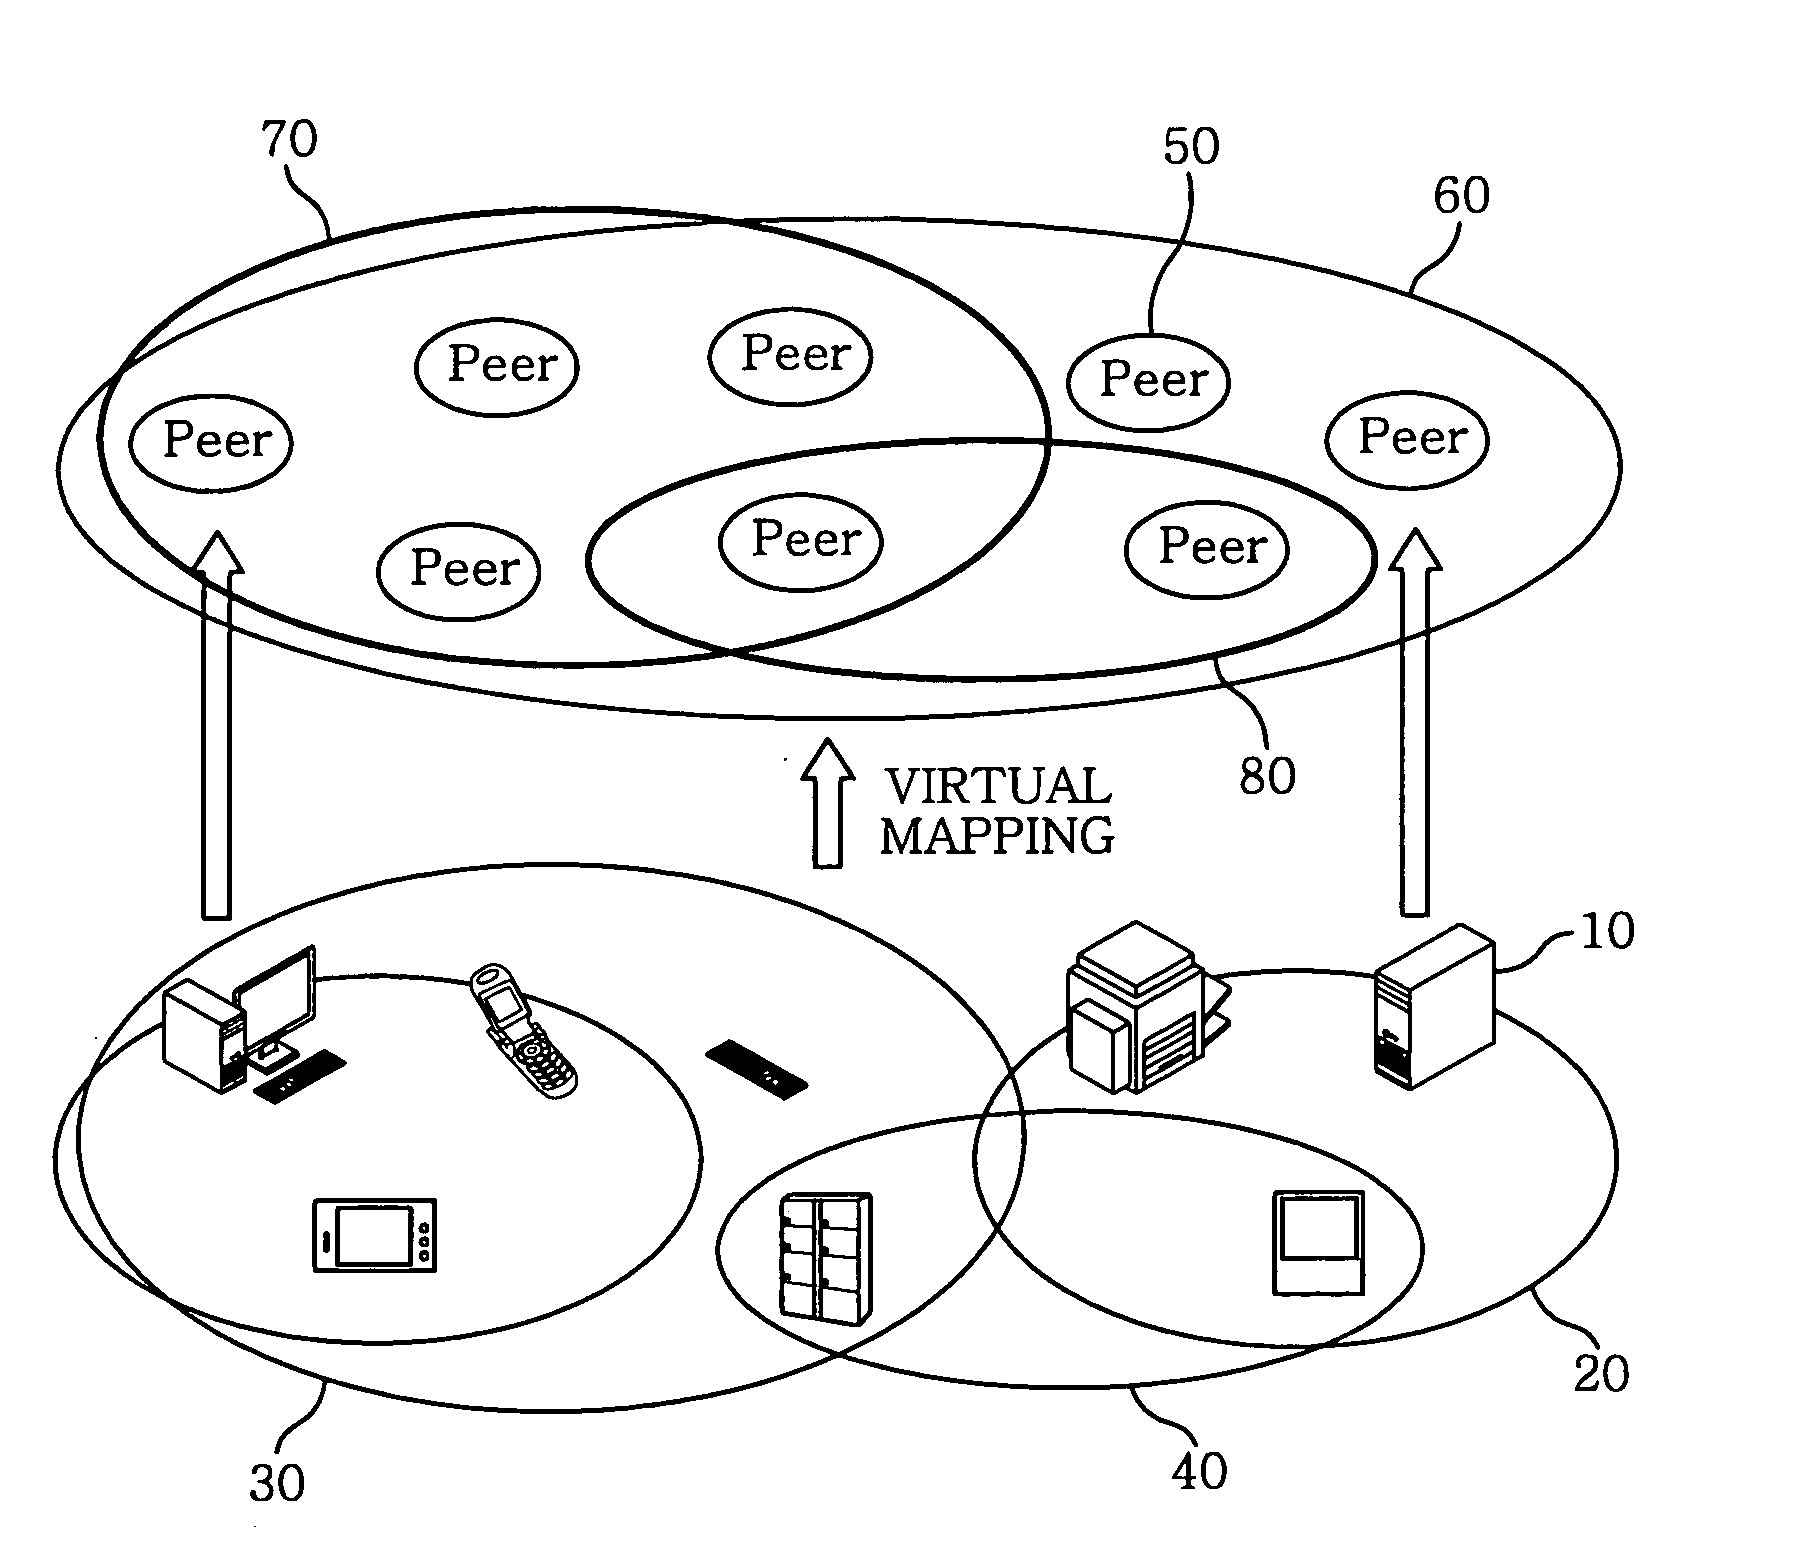 Method and apparatus for providing social networking service based on peer-to-peer network